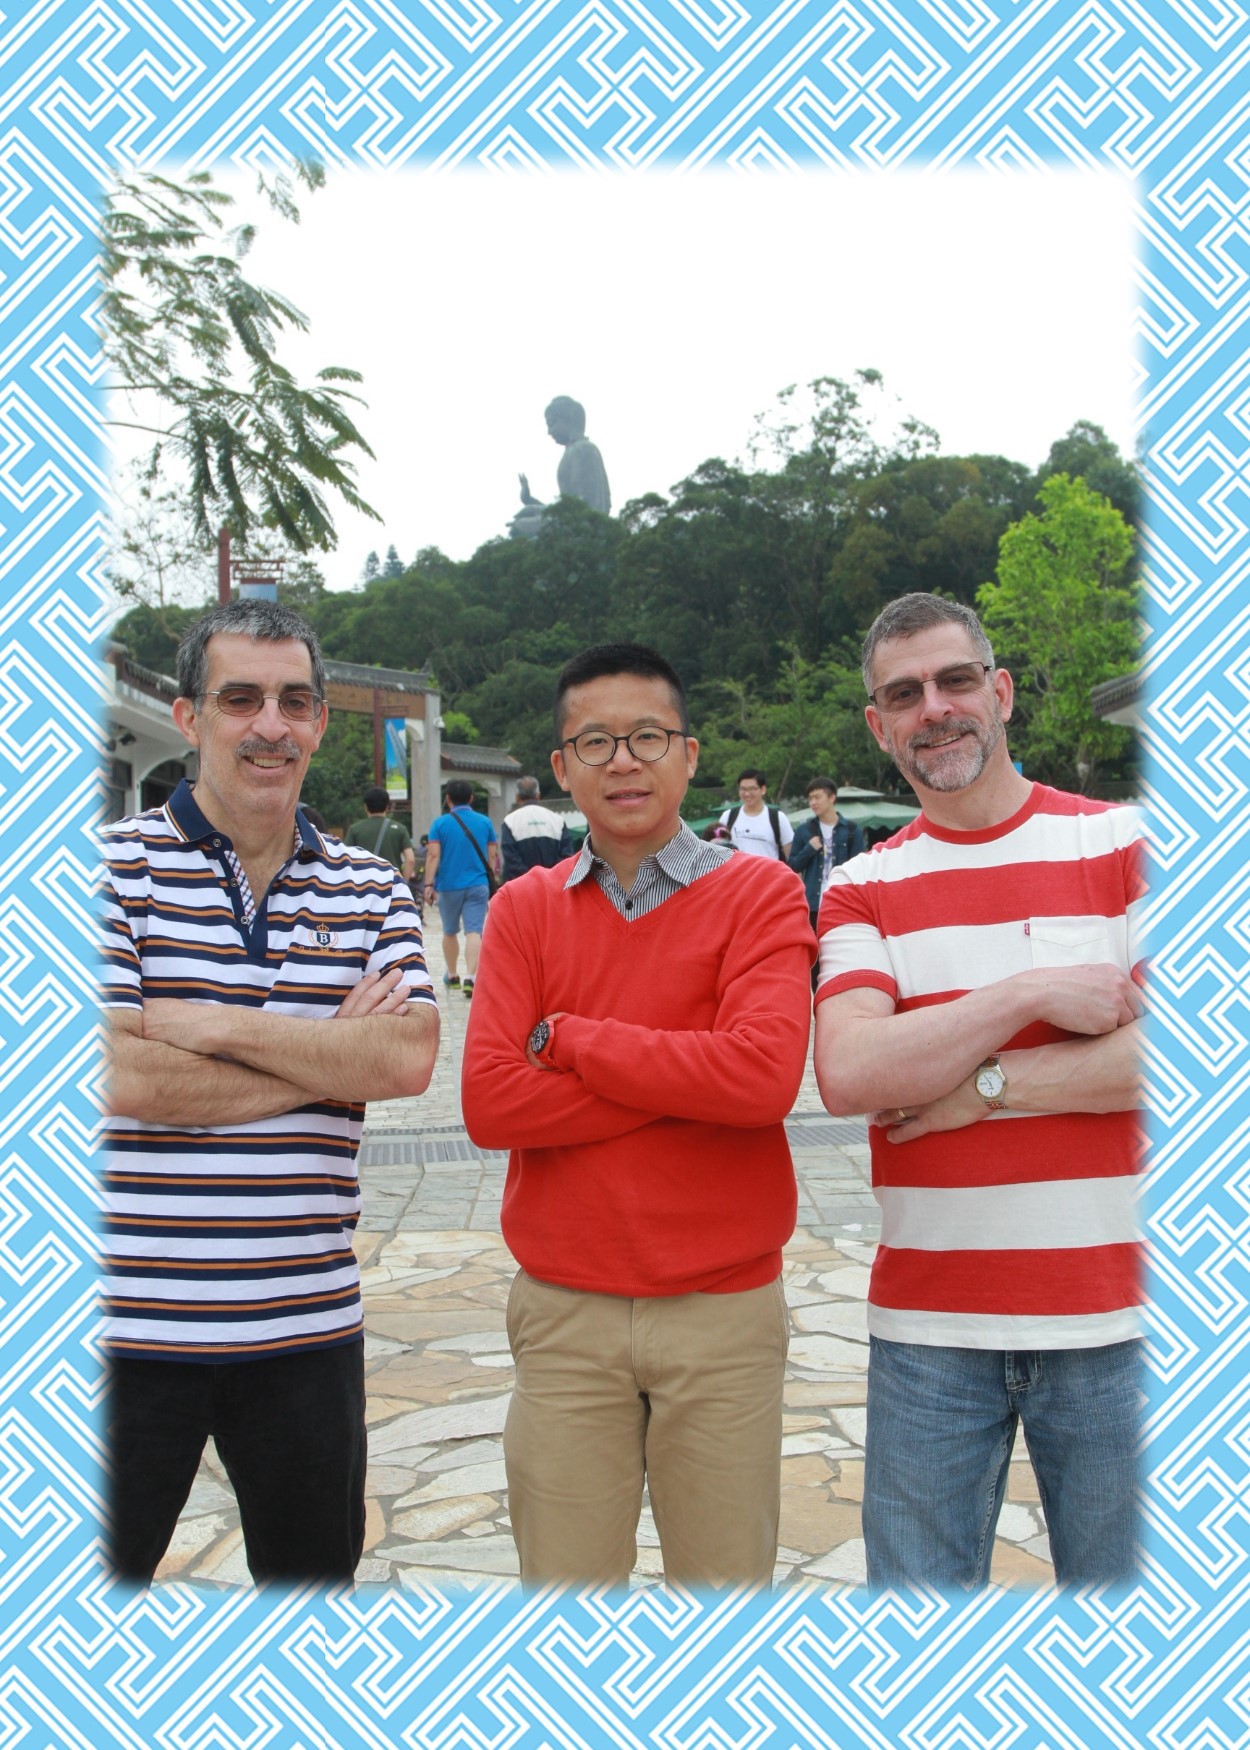 Frank the tour guide takes photo with Marvin Downs and friend at Ngong Ping